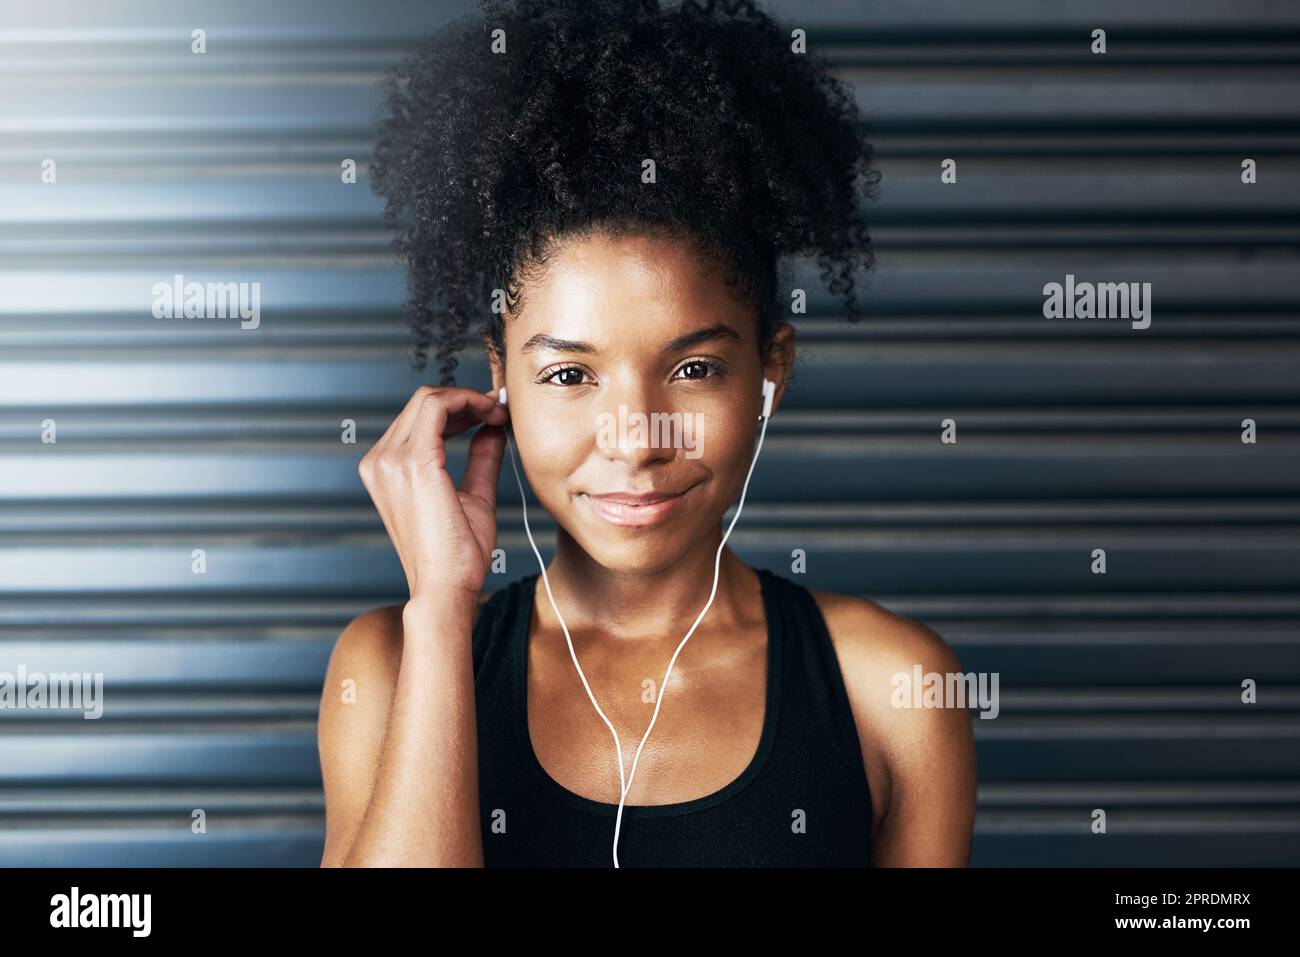 Lets go out for a heart-pumping run. Portrait of a sporty young woman listening to music while exercising against a grey background. Stock Photo